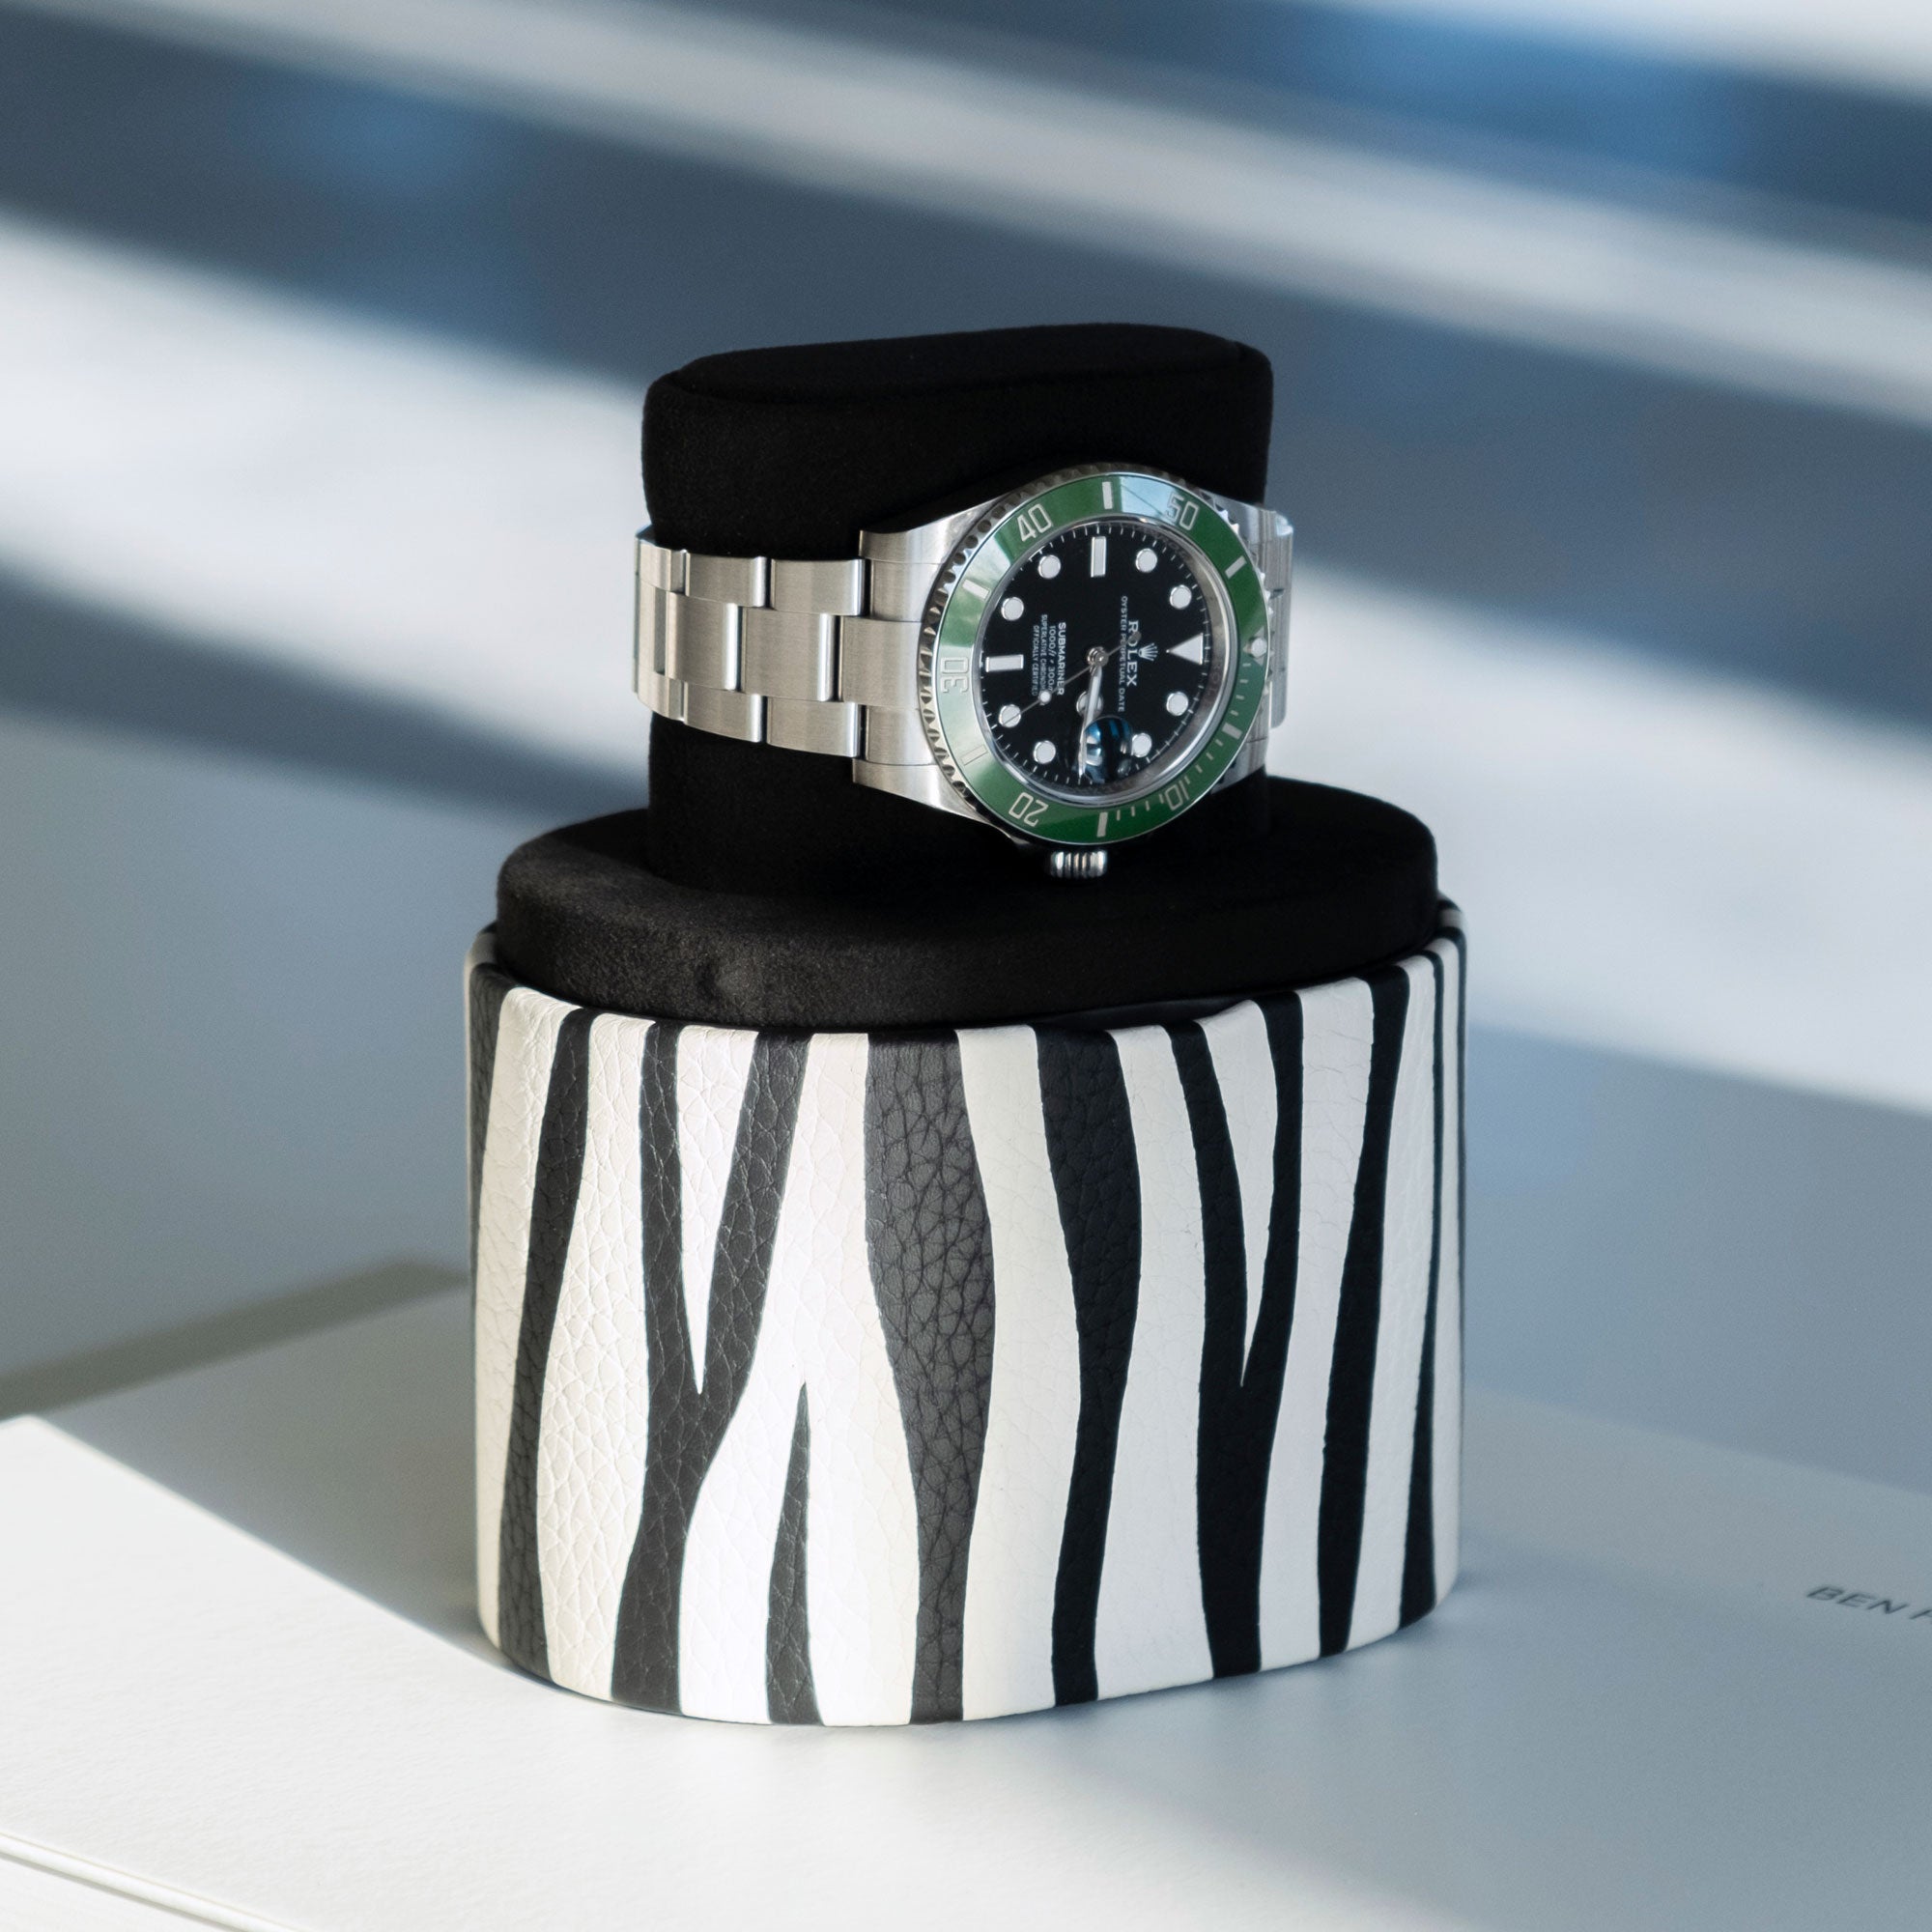 Luxury watch displayed on elegant zebra watch roll by Charles Simon in convenient portable watch stand position